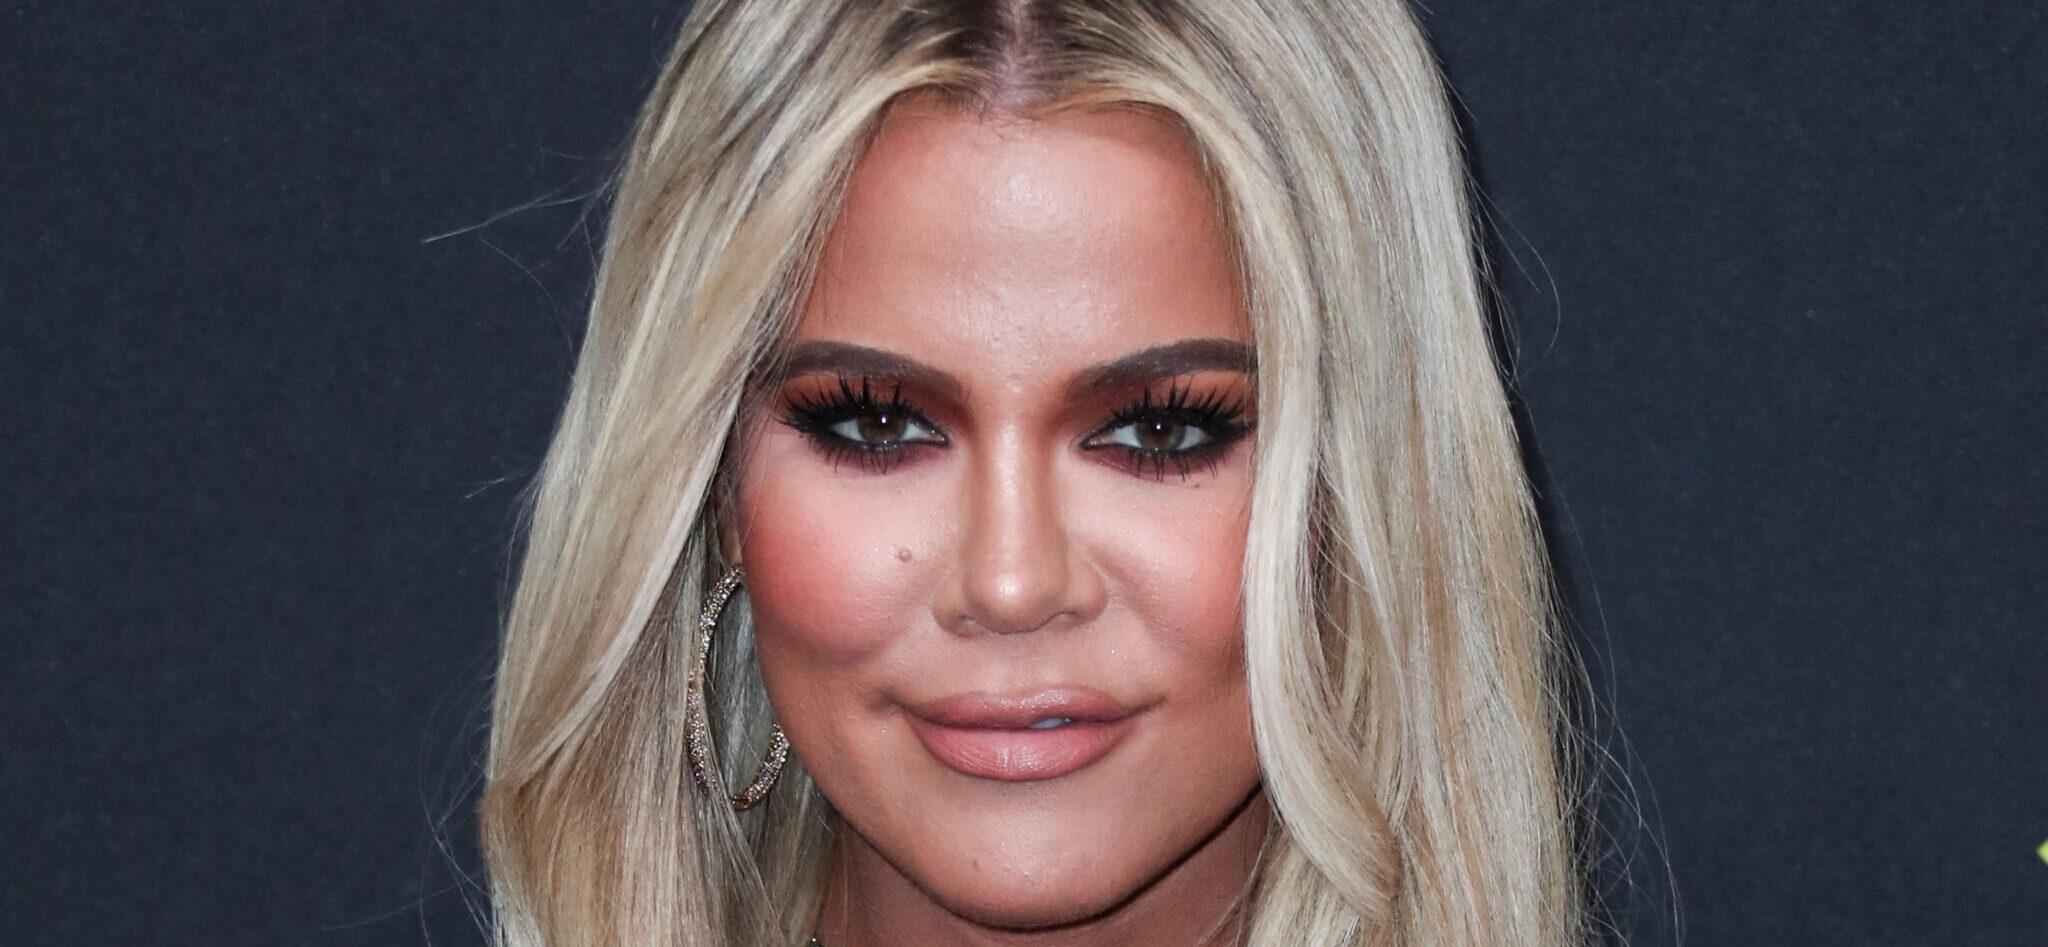 Khloe Kardashian Accused Of Using Facetune On Her Cat: ‘Even The Cat Got Work Done’